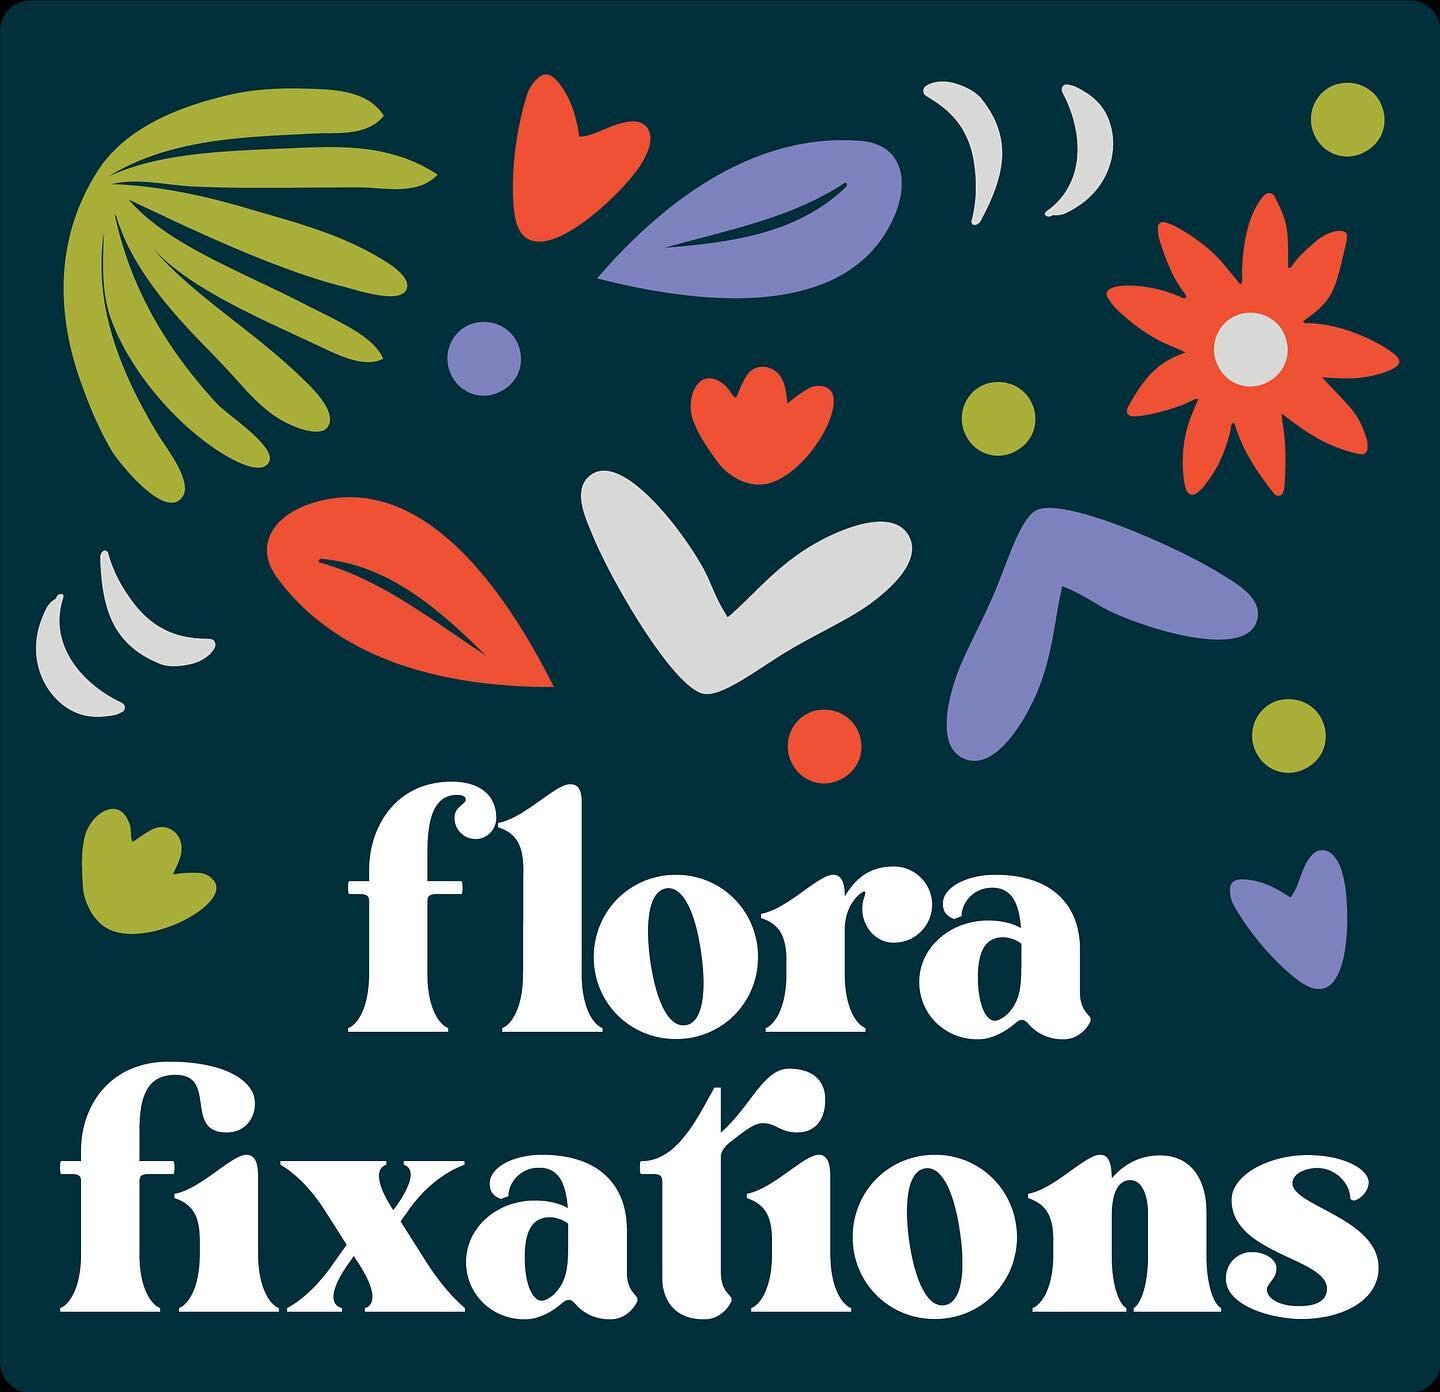 🍄NEW LOOK, SAME SPICY SERVICE 

With Flora Fixations, I wanted to provide a service that meets my clients where they&rsquo;re at. And not everyone wants the cinematic, instagram-viral, white-rose-filled extravaganza that&rsquo;s become associated wi